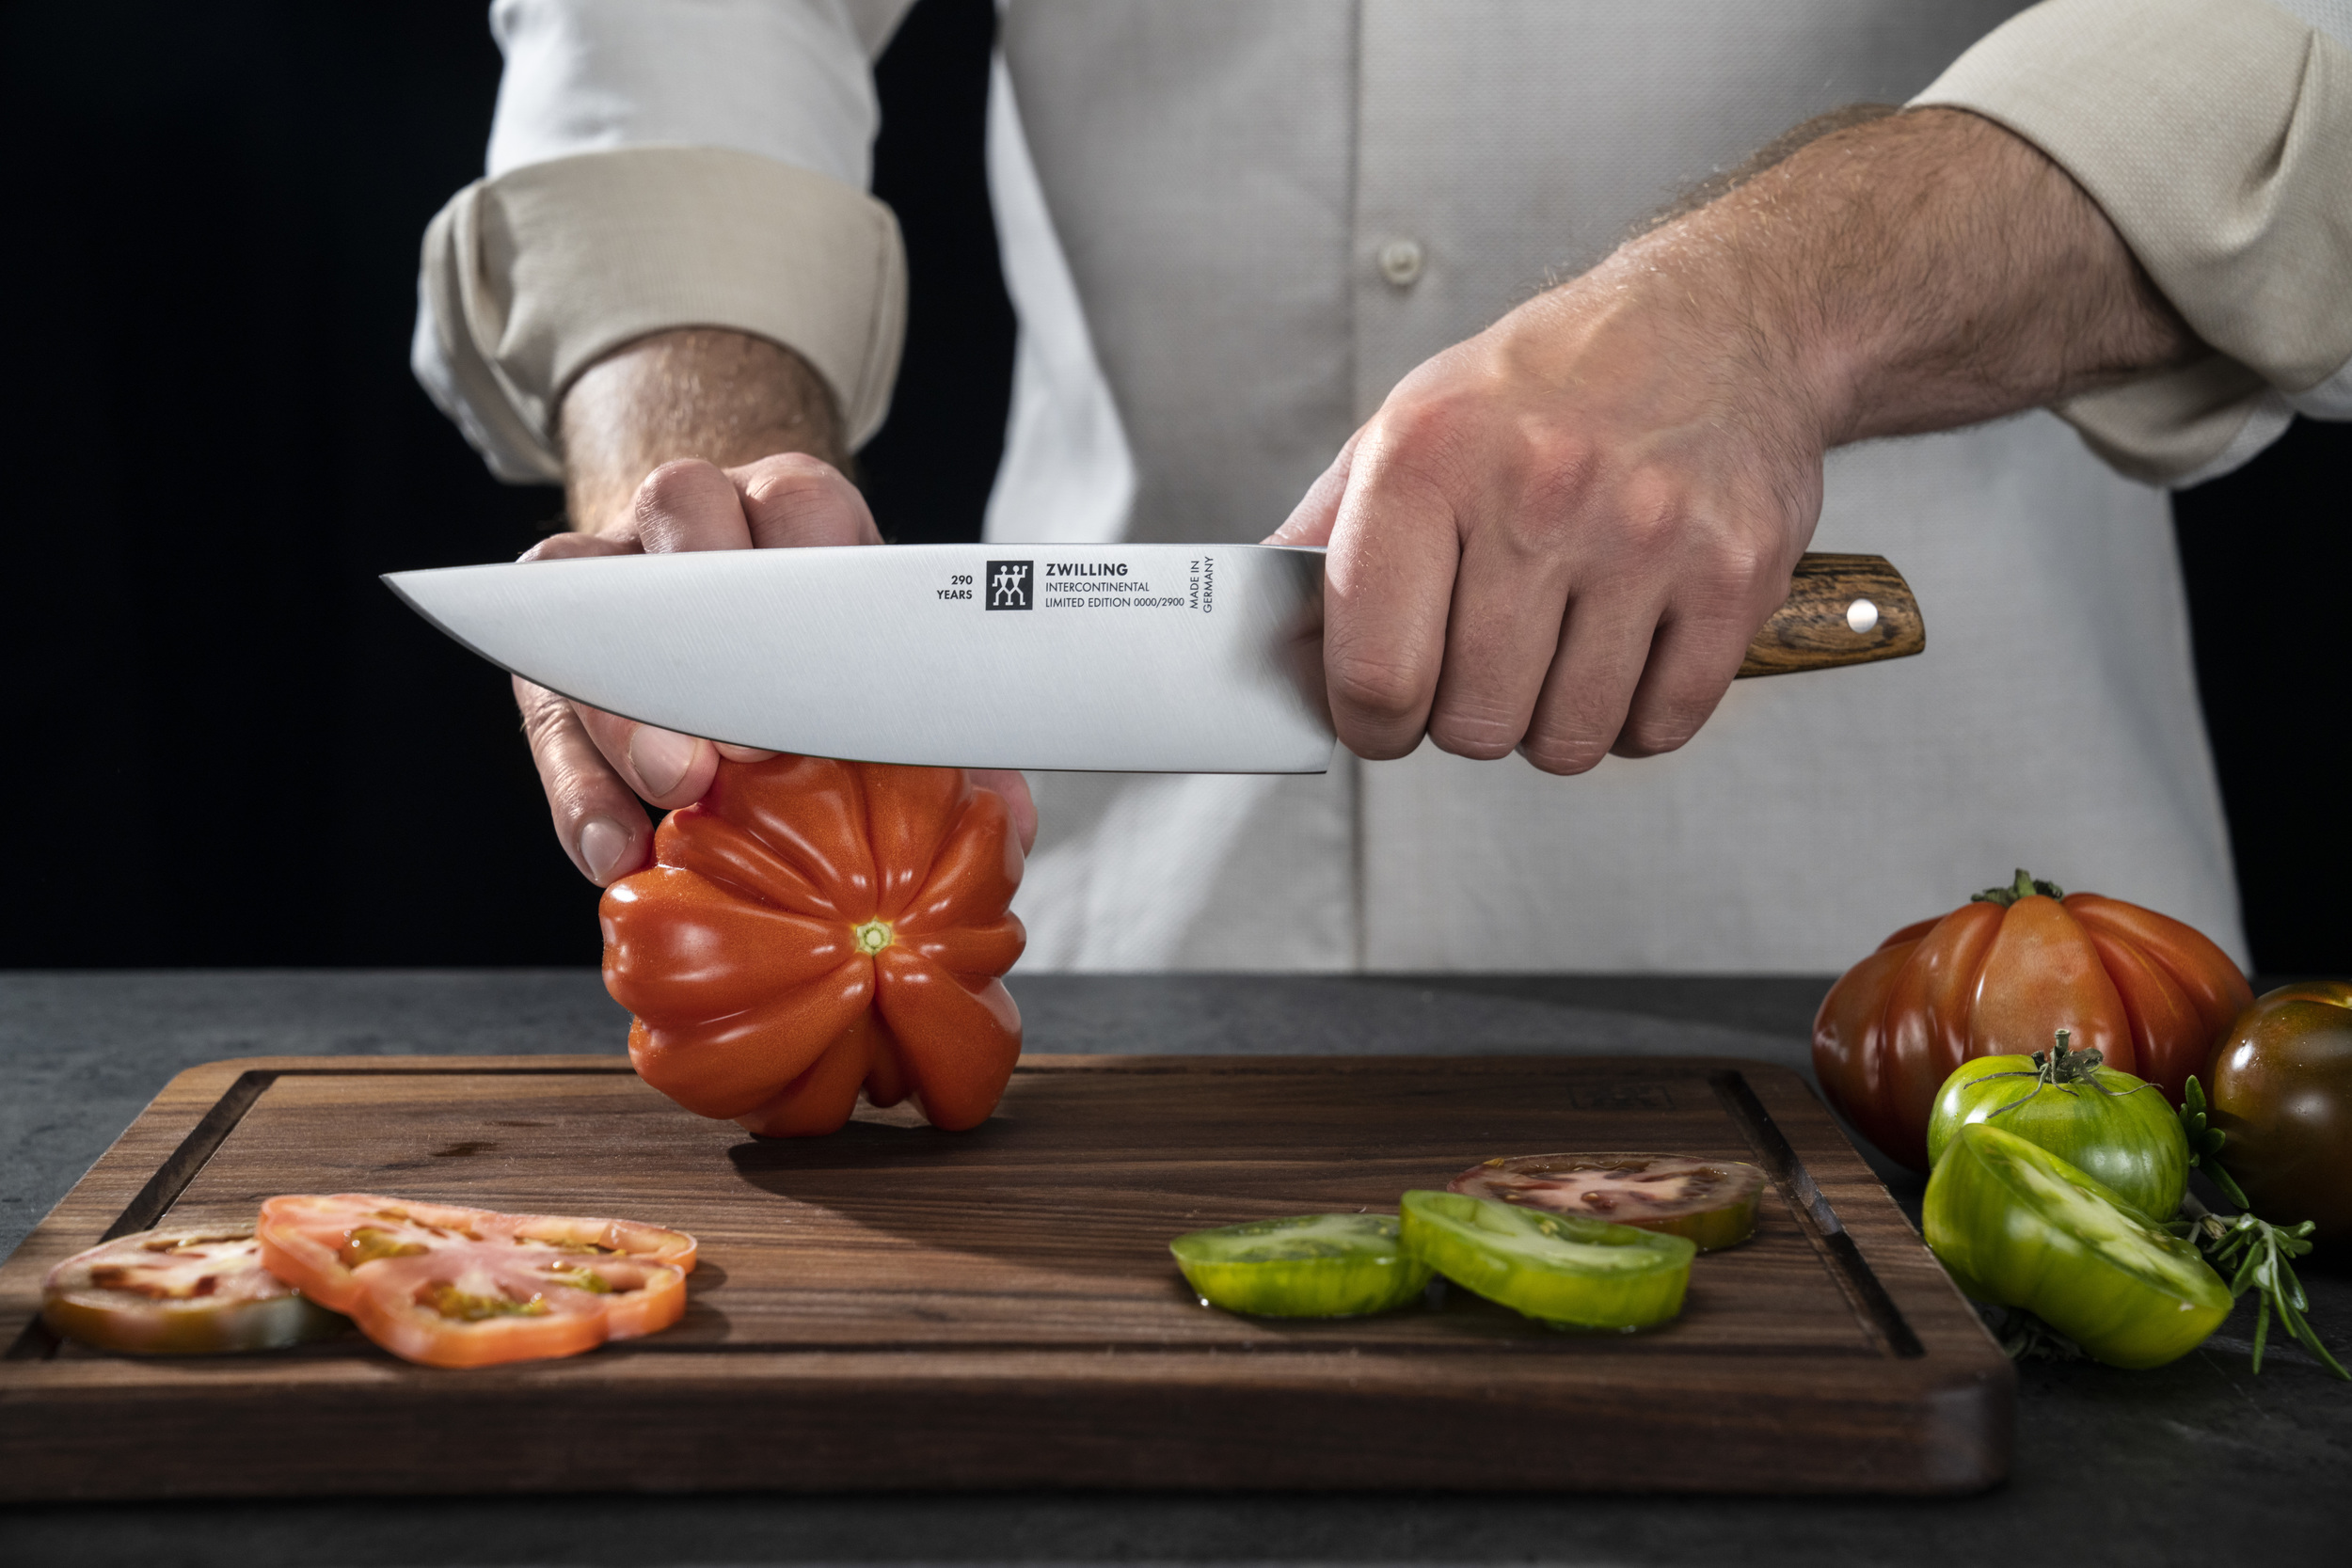 Zwilling - Intercontinental - Carving Knife 200mm - Limited Edition -  33021-201-0 - kitchen knife